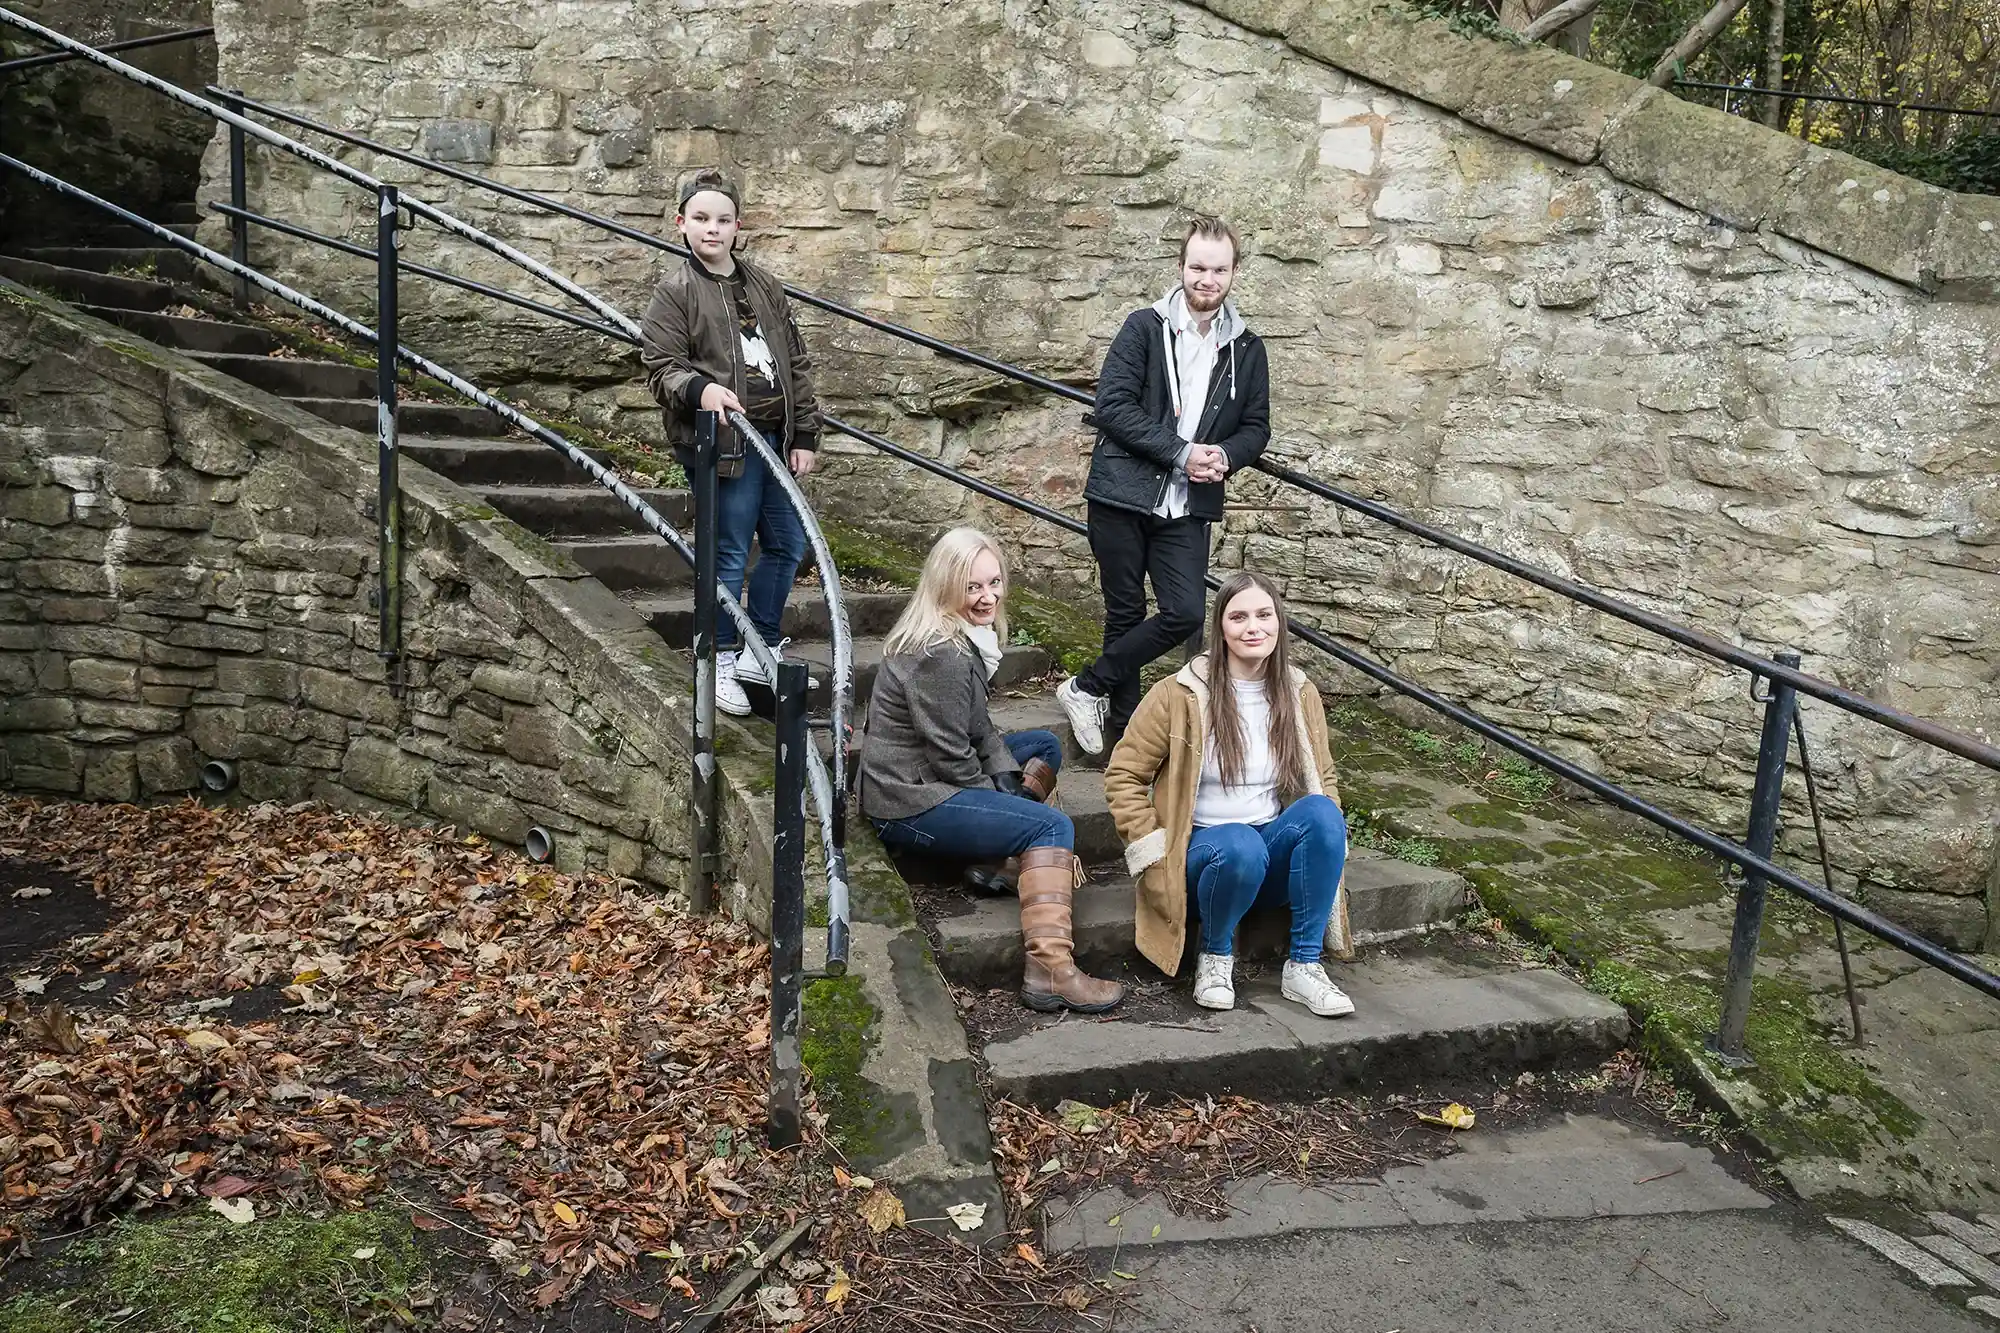 Four people pose on stone steps beside an old stone wall. Two women sit while two men stand, all dressed casually. Fallen autumn leaves cover parts of the ground.